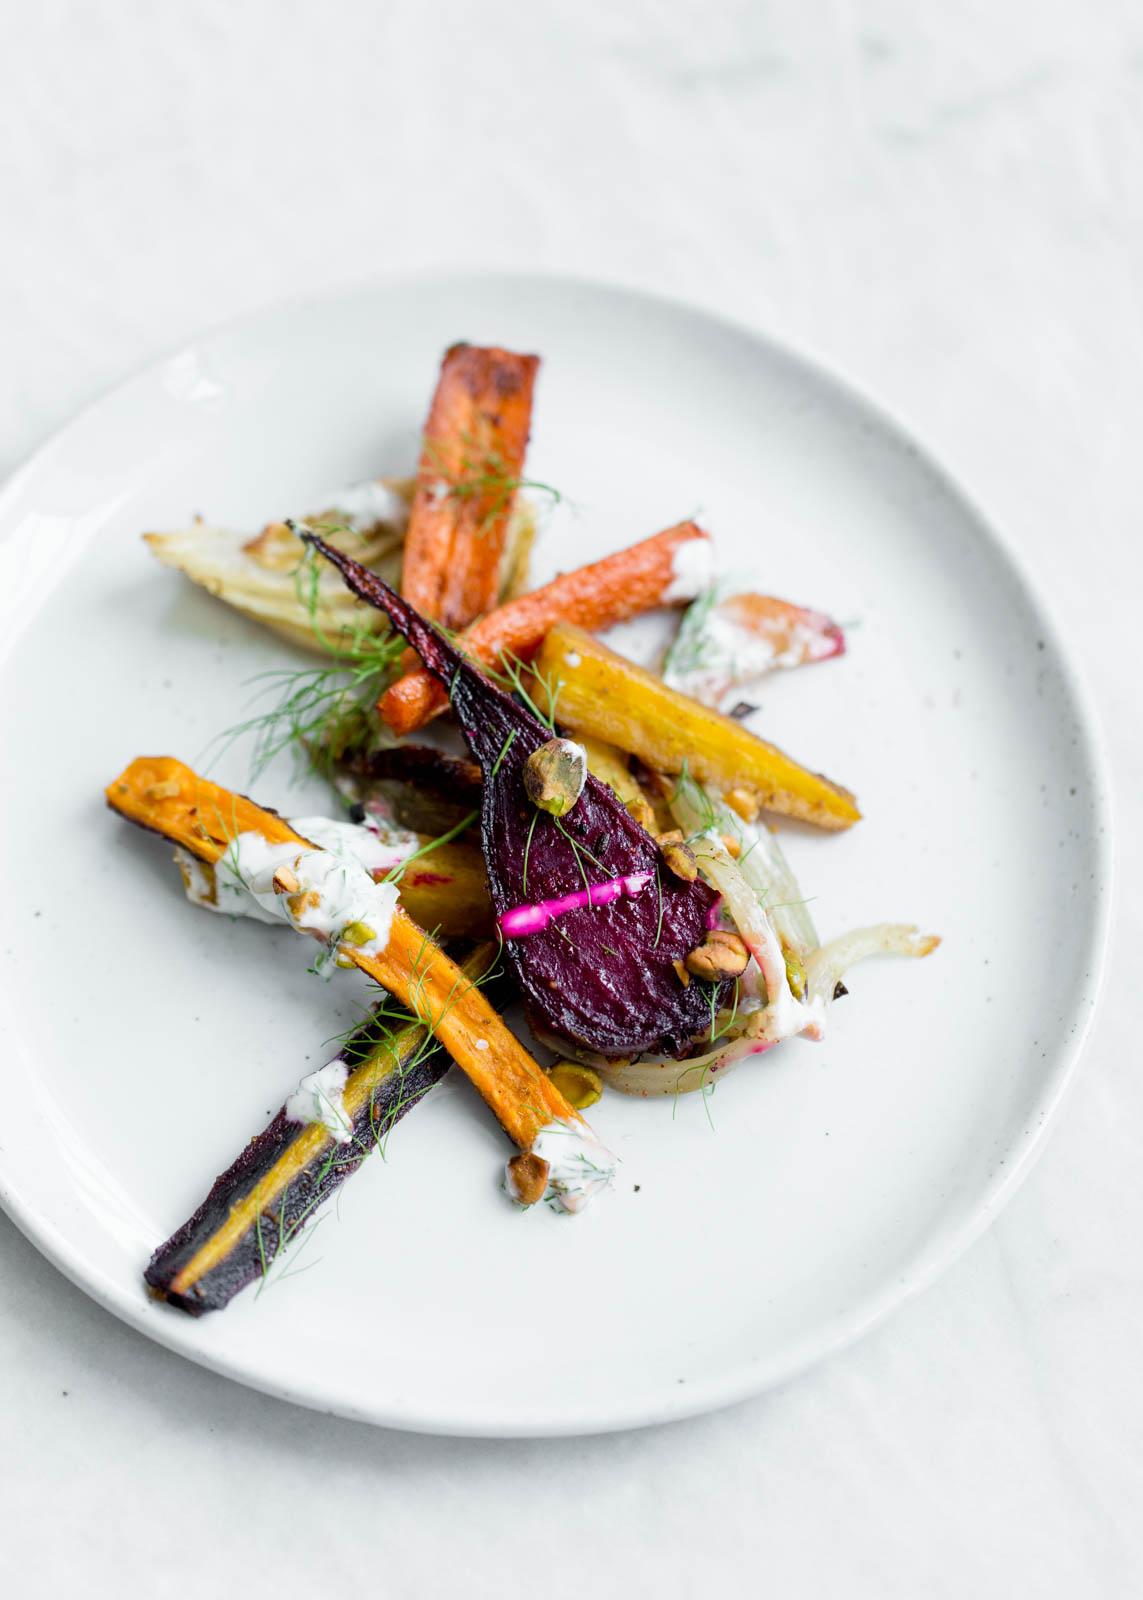 Perfectly caramelized Roasted Root Vegetables tossed in fennel and cumin and drizzled with pistachio yogurt and fennel fronds.